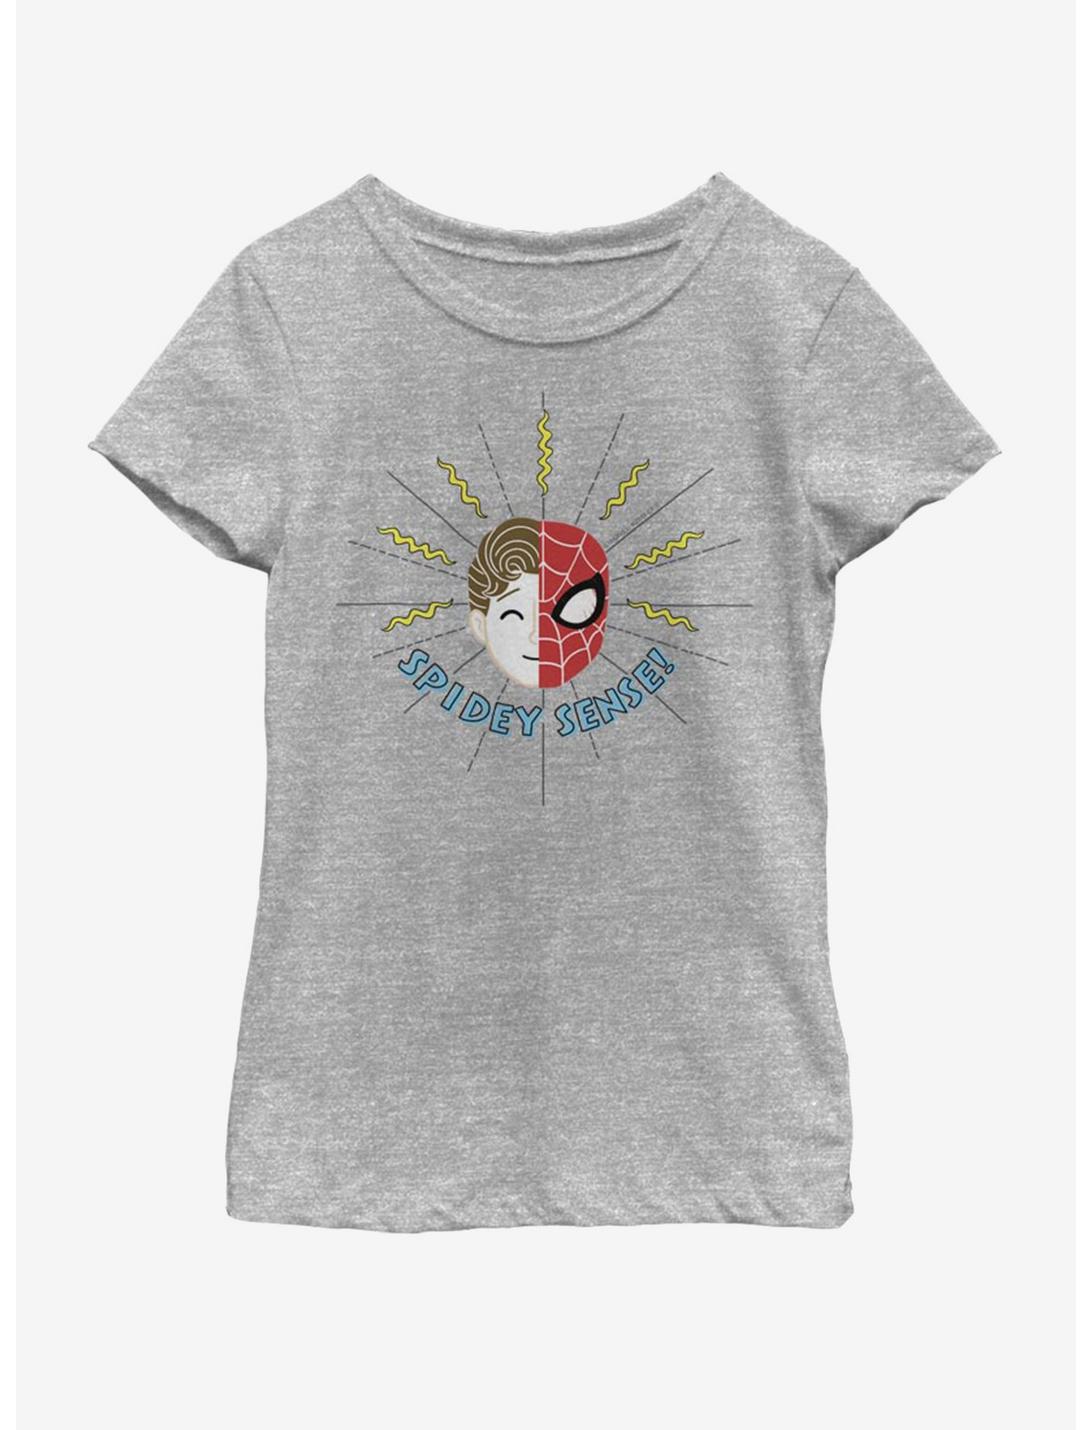 Marvel Spiderman Far From Home Spidey Sense Youth Girls T-Shirt, ATH HTR, hi-res